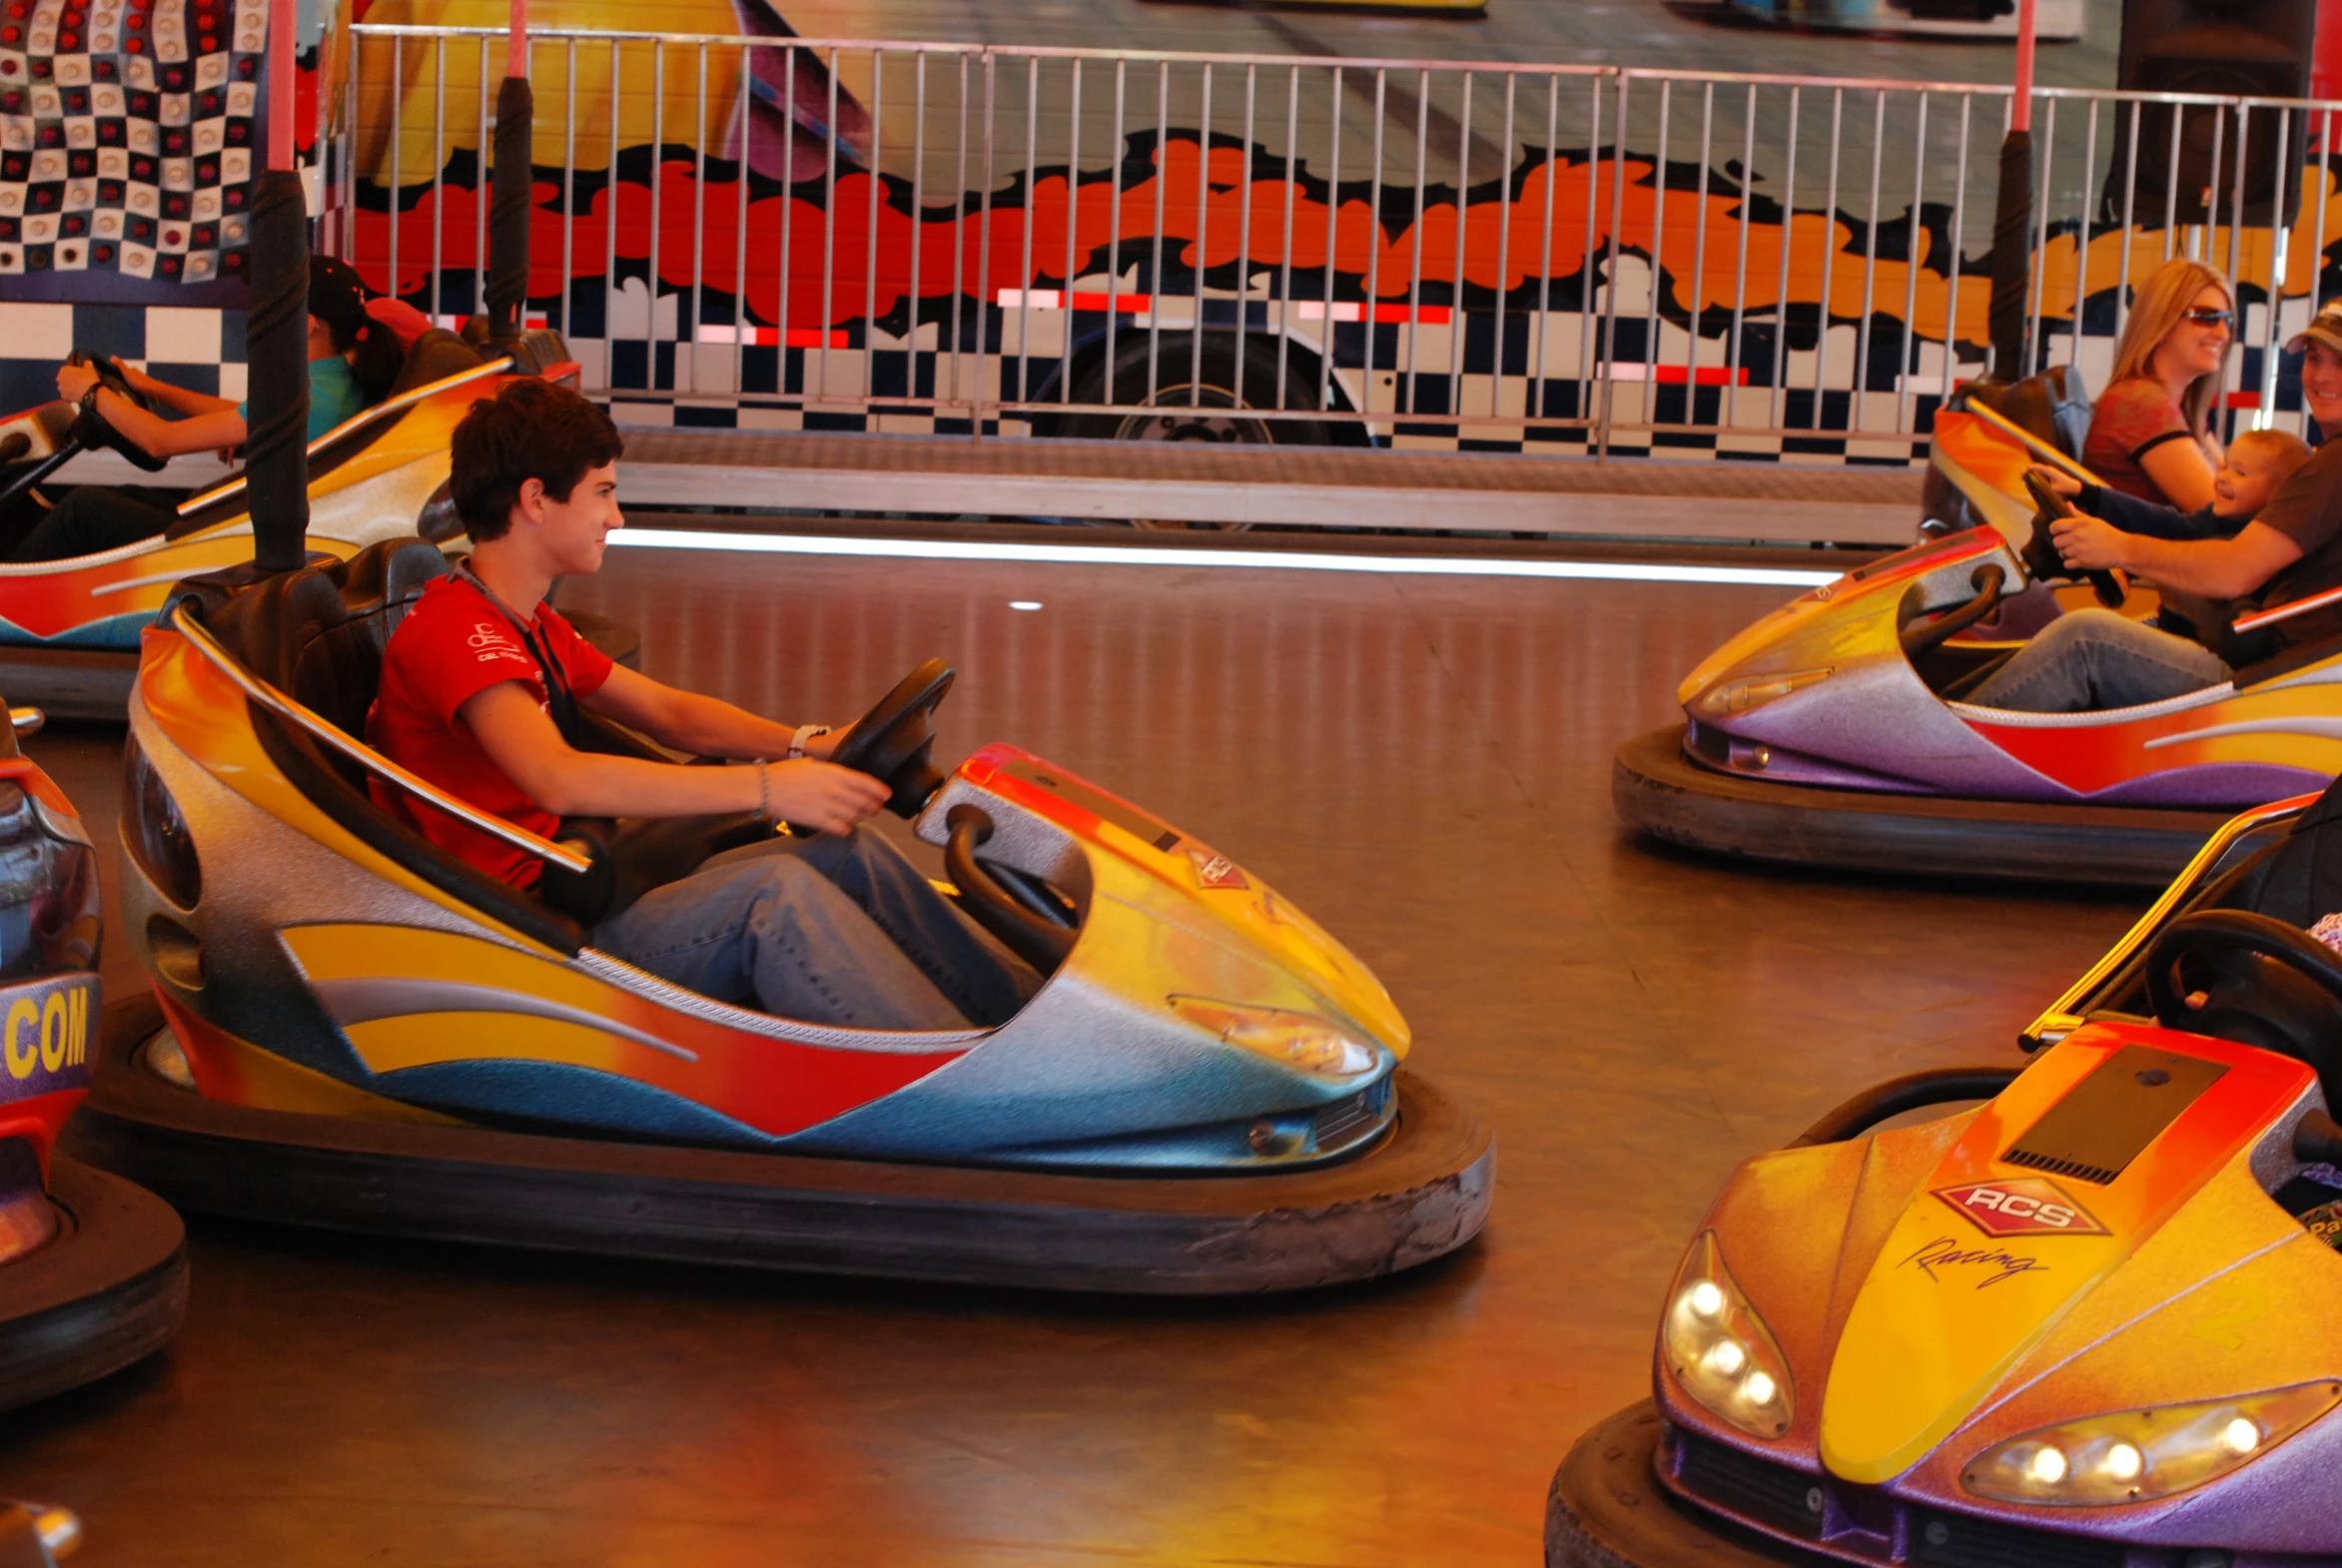 a small group of people ride around in bumper cars